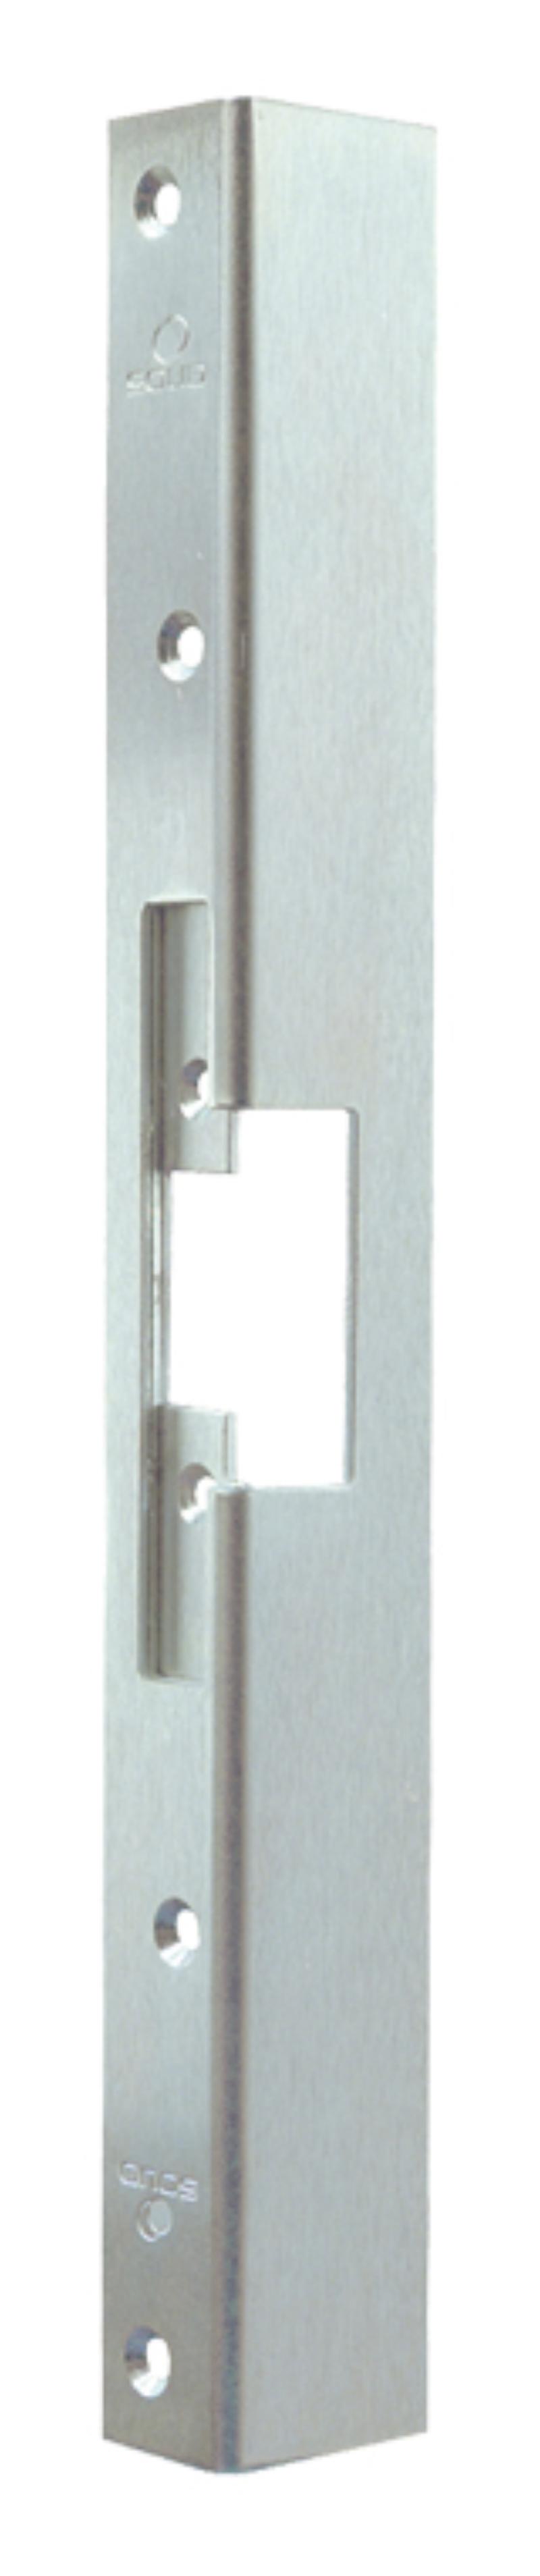 Solid post 512 t/electric end plate (971252)